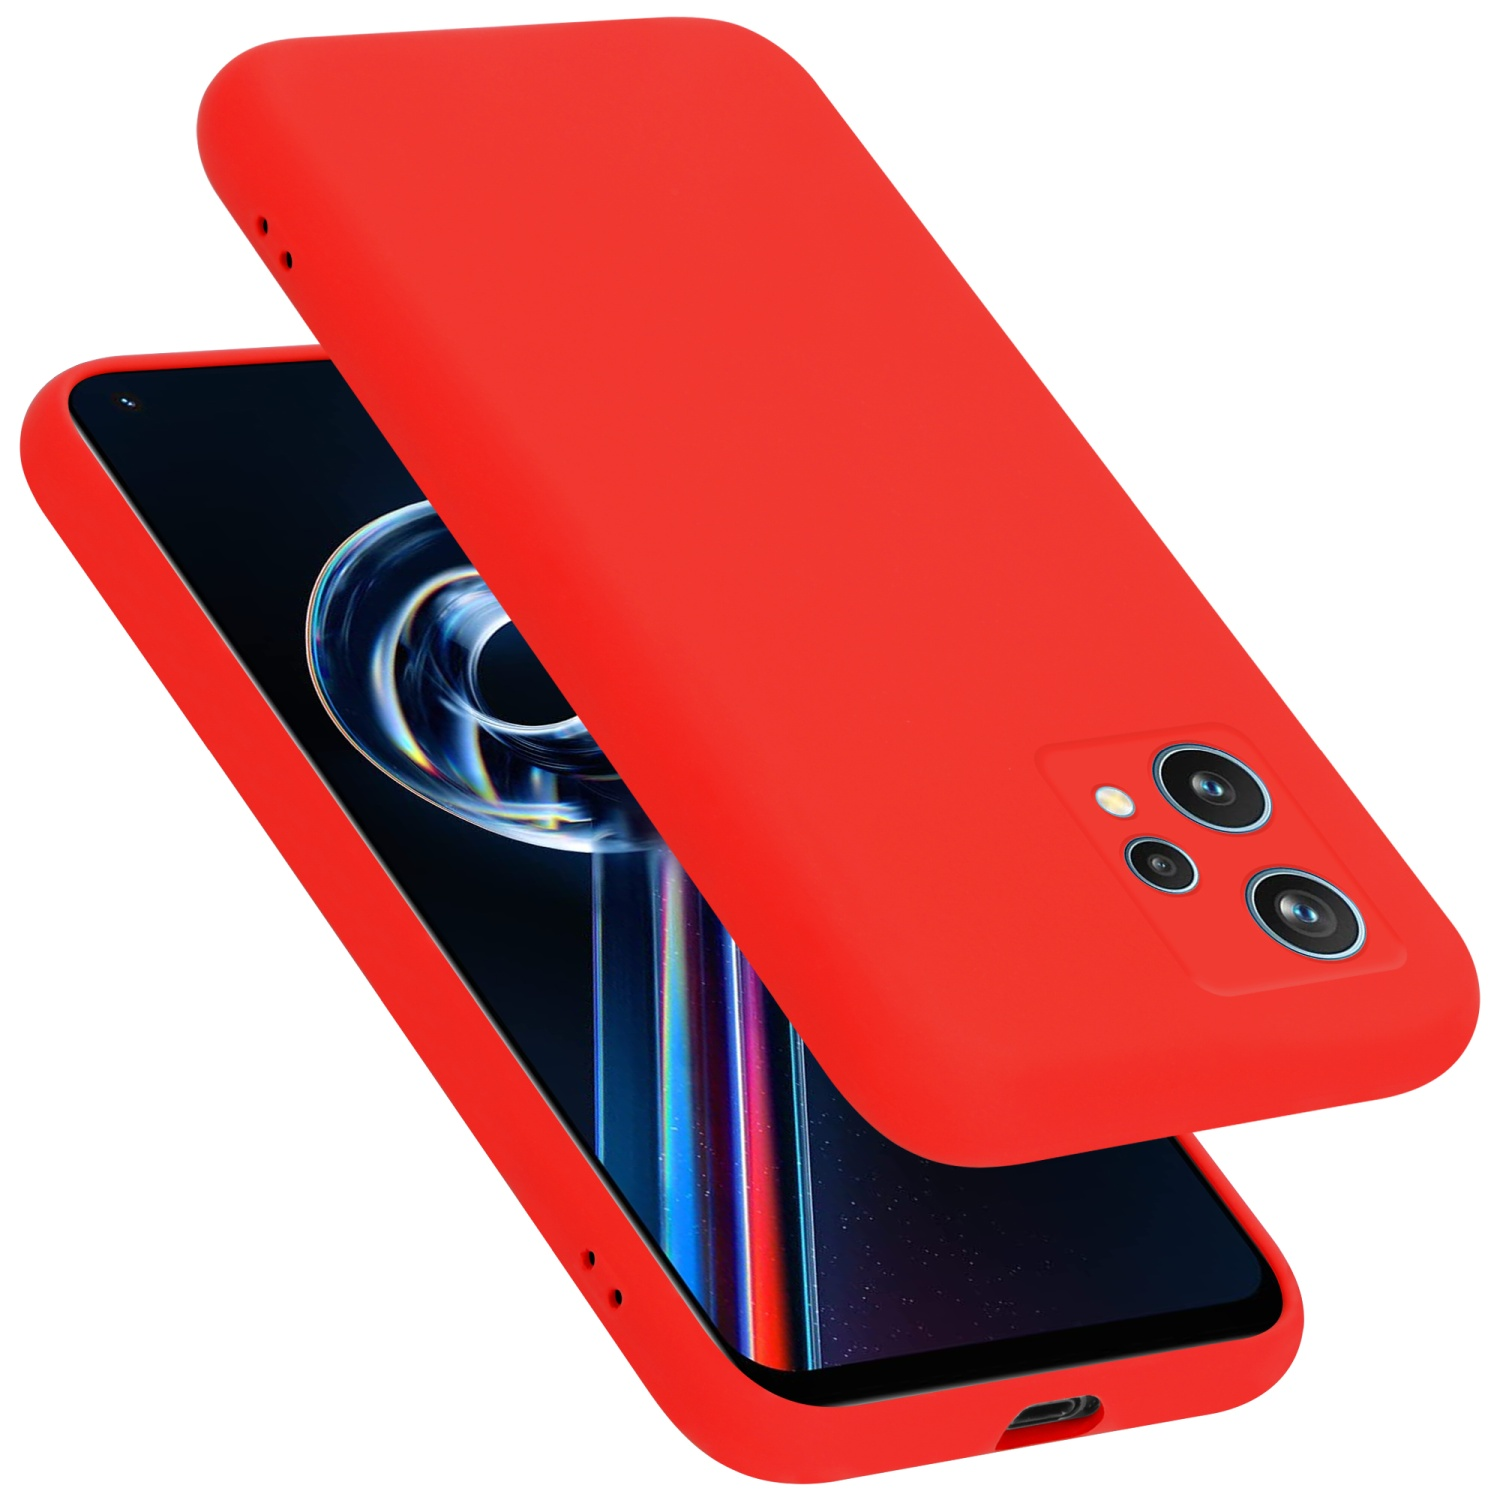 LIQUID / 5G, Silicone / V25 Nord im 9 5G PRO 9 Q5 Realme, Hülle / 2 Style, CADORABO Liquid / OnePlus ROT Case LITE Backcover, CE